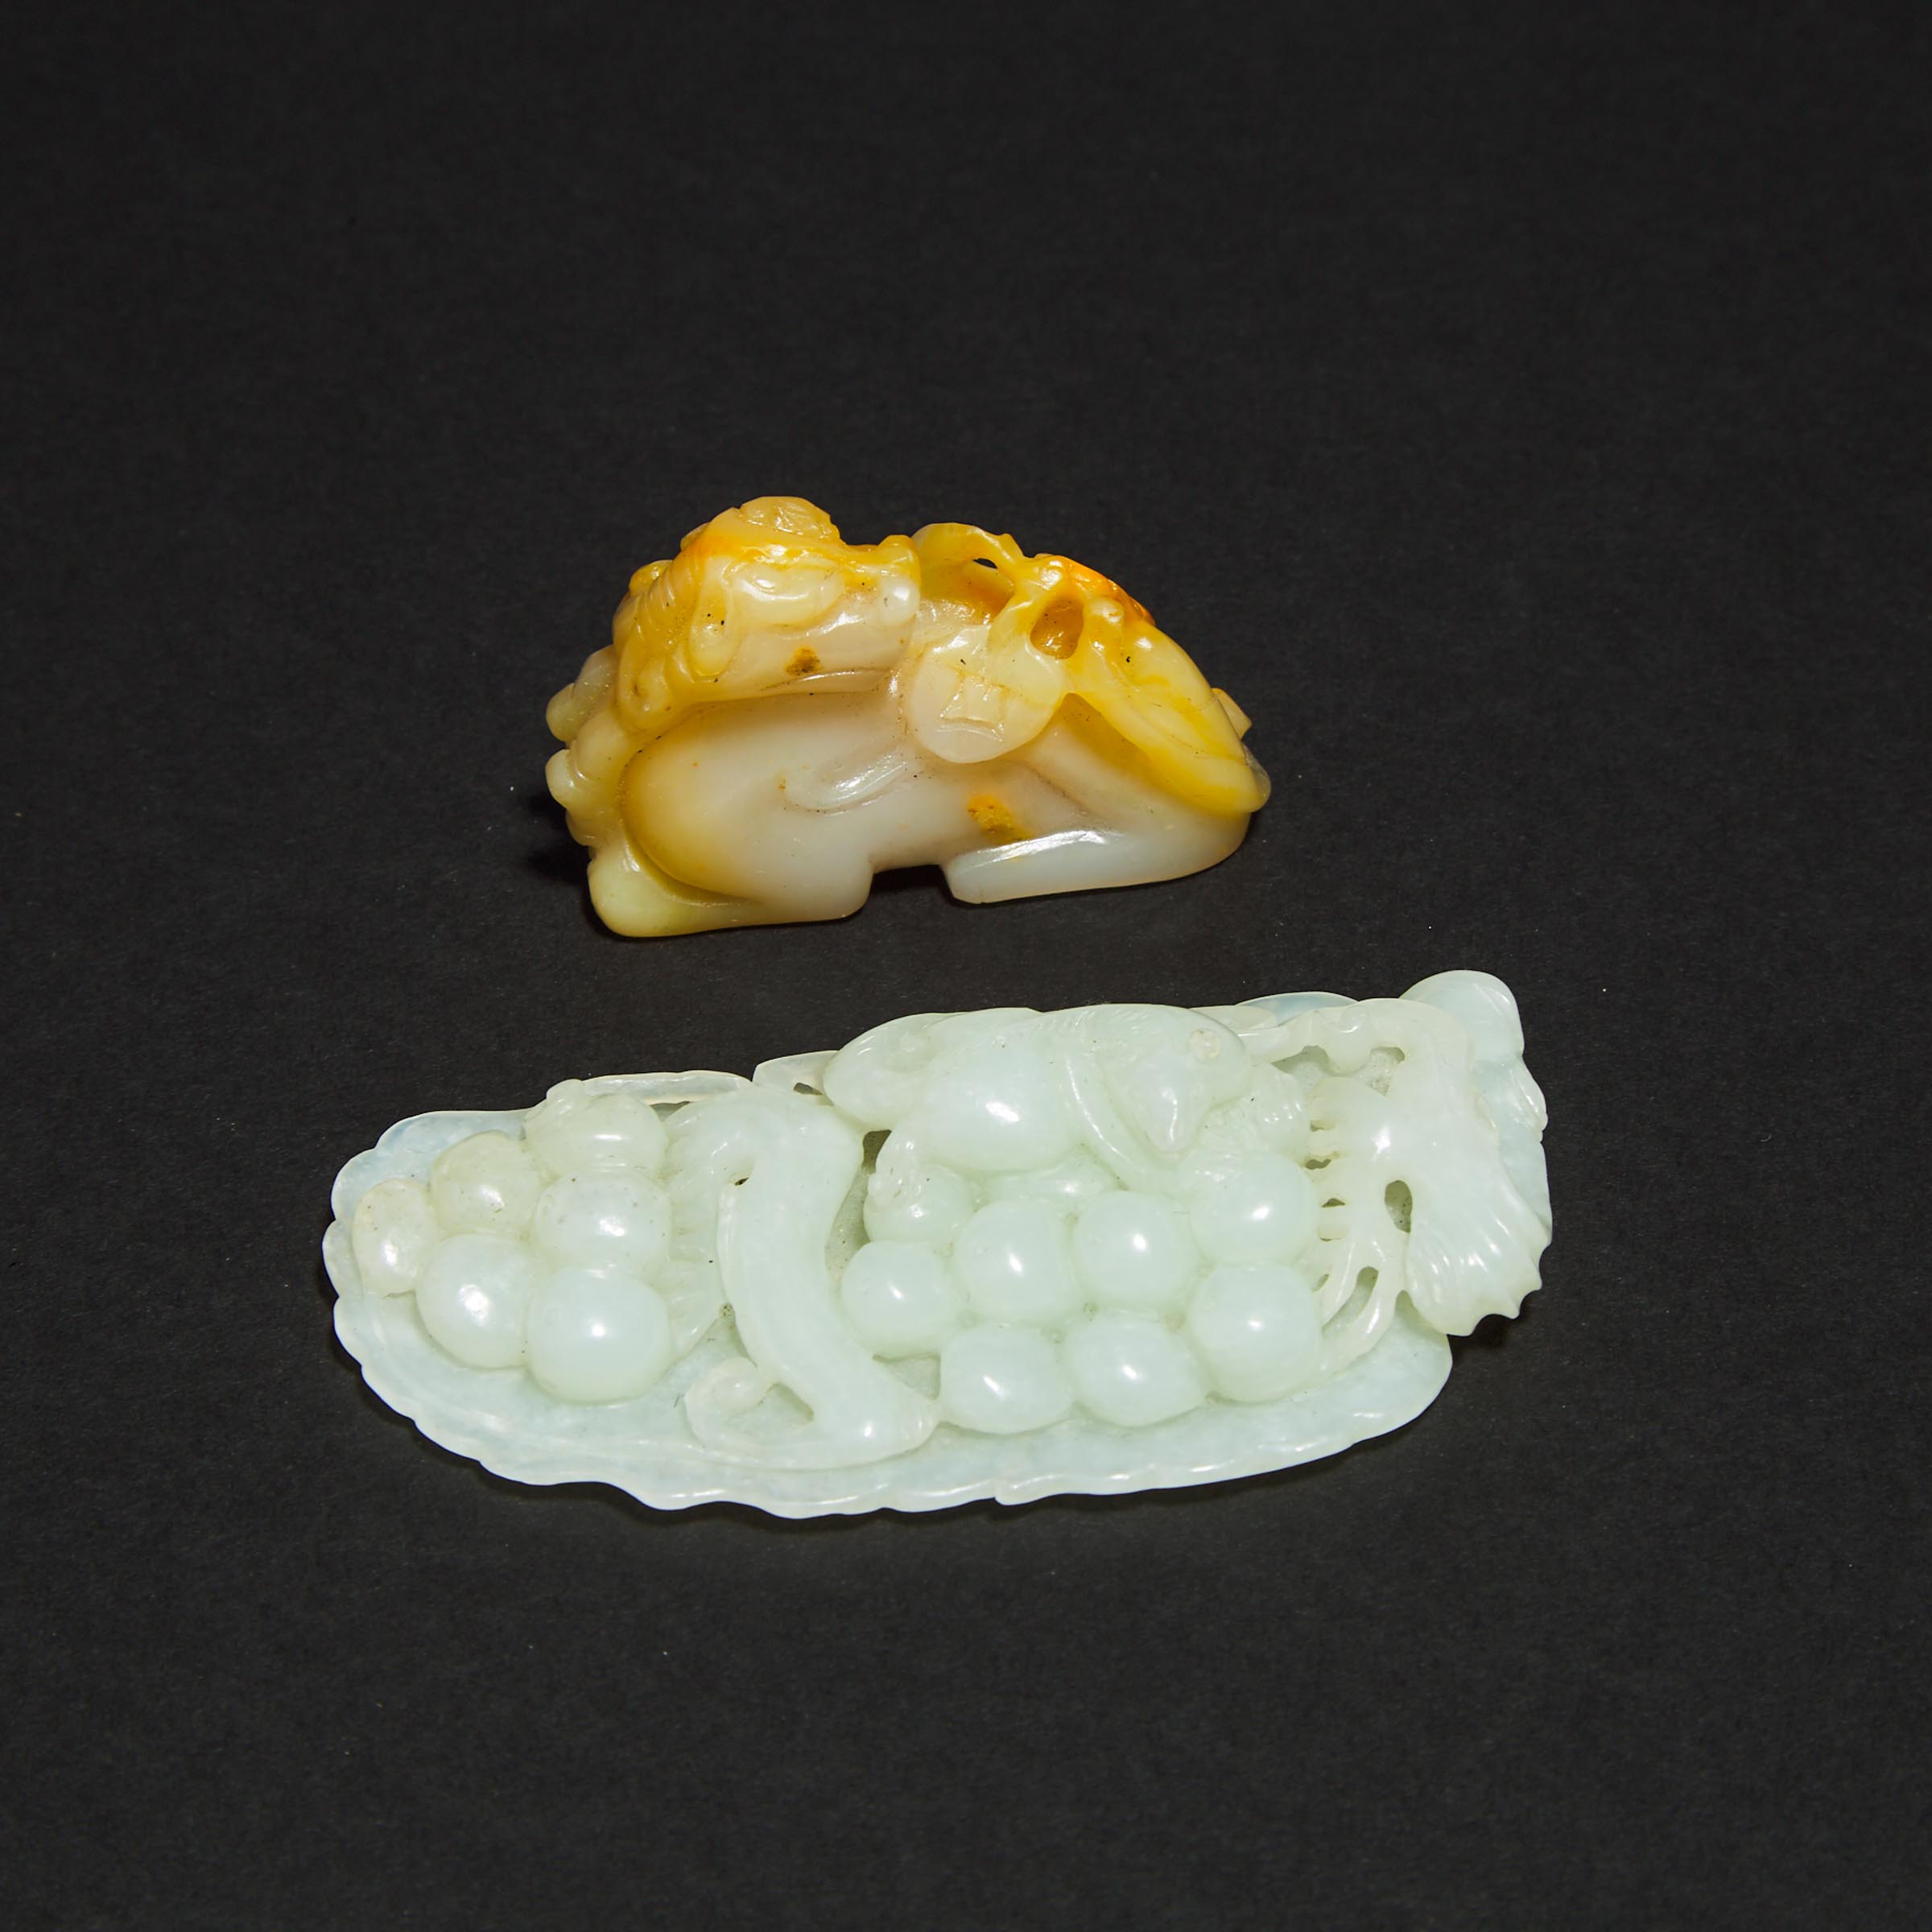 A Carved White Jade 'Squirrel and Grape' Pendant, together with a White and Russet Jade Mythical Beast